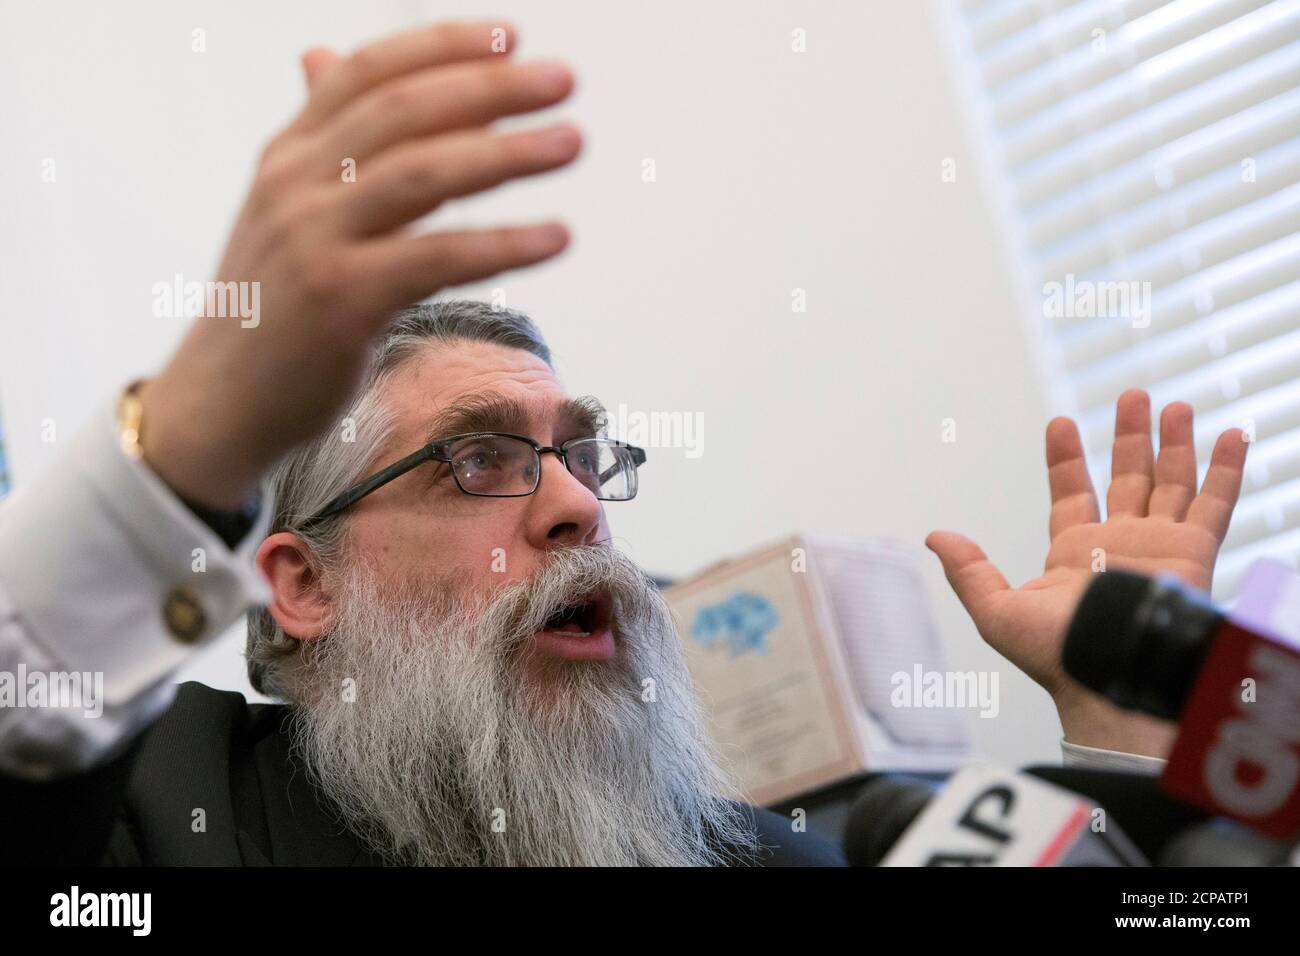 Rabbi Yaakov Dov Bleich, Chief Rabbi of Ukraine, speaks during a news conference in New York March 3, 2014. Bleich is to meet with U.S. Secretary of State John Kerry and other political and religious leaders on Tuesday in Ukraine.  REUTERS/Brendan McDermid (UNITED STATES - Tags: RELIGION POLITICS CONFLICT) Stock Photo